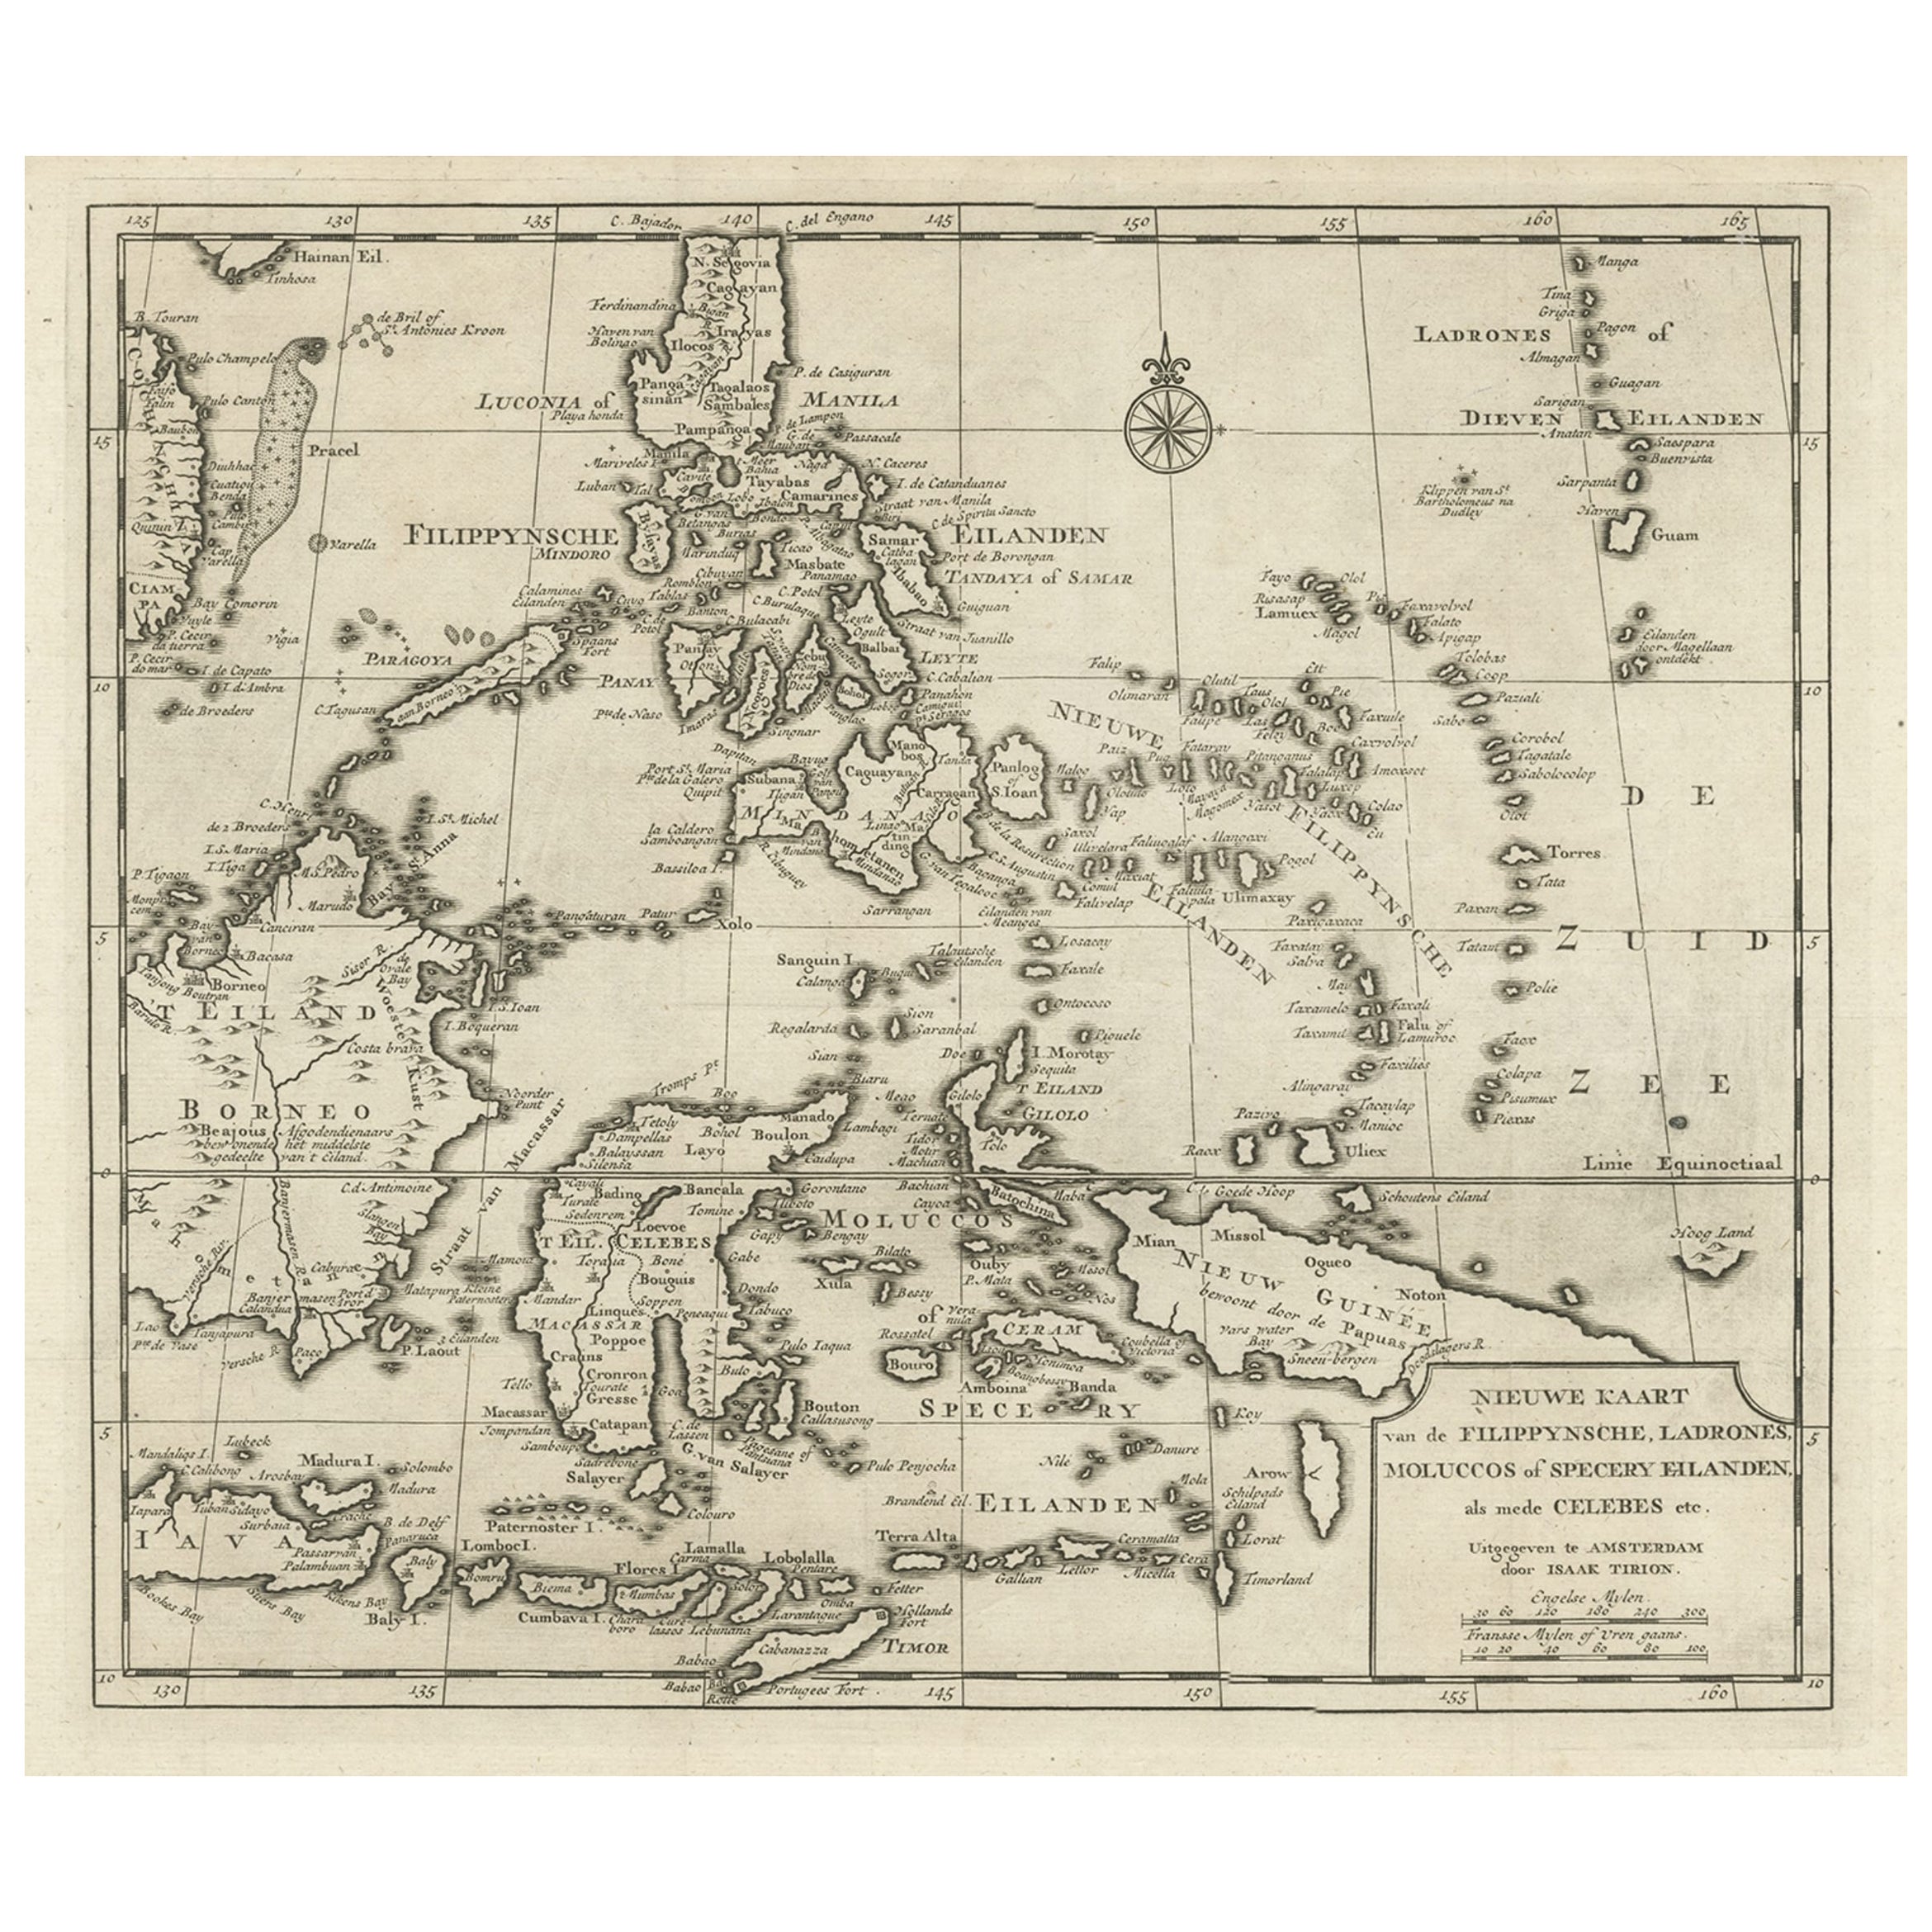 Old Map of the Philippines and Part of Indonesia 'Spice Islands', 1744 For Sale